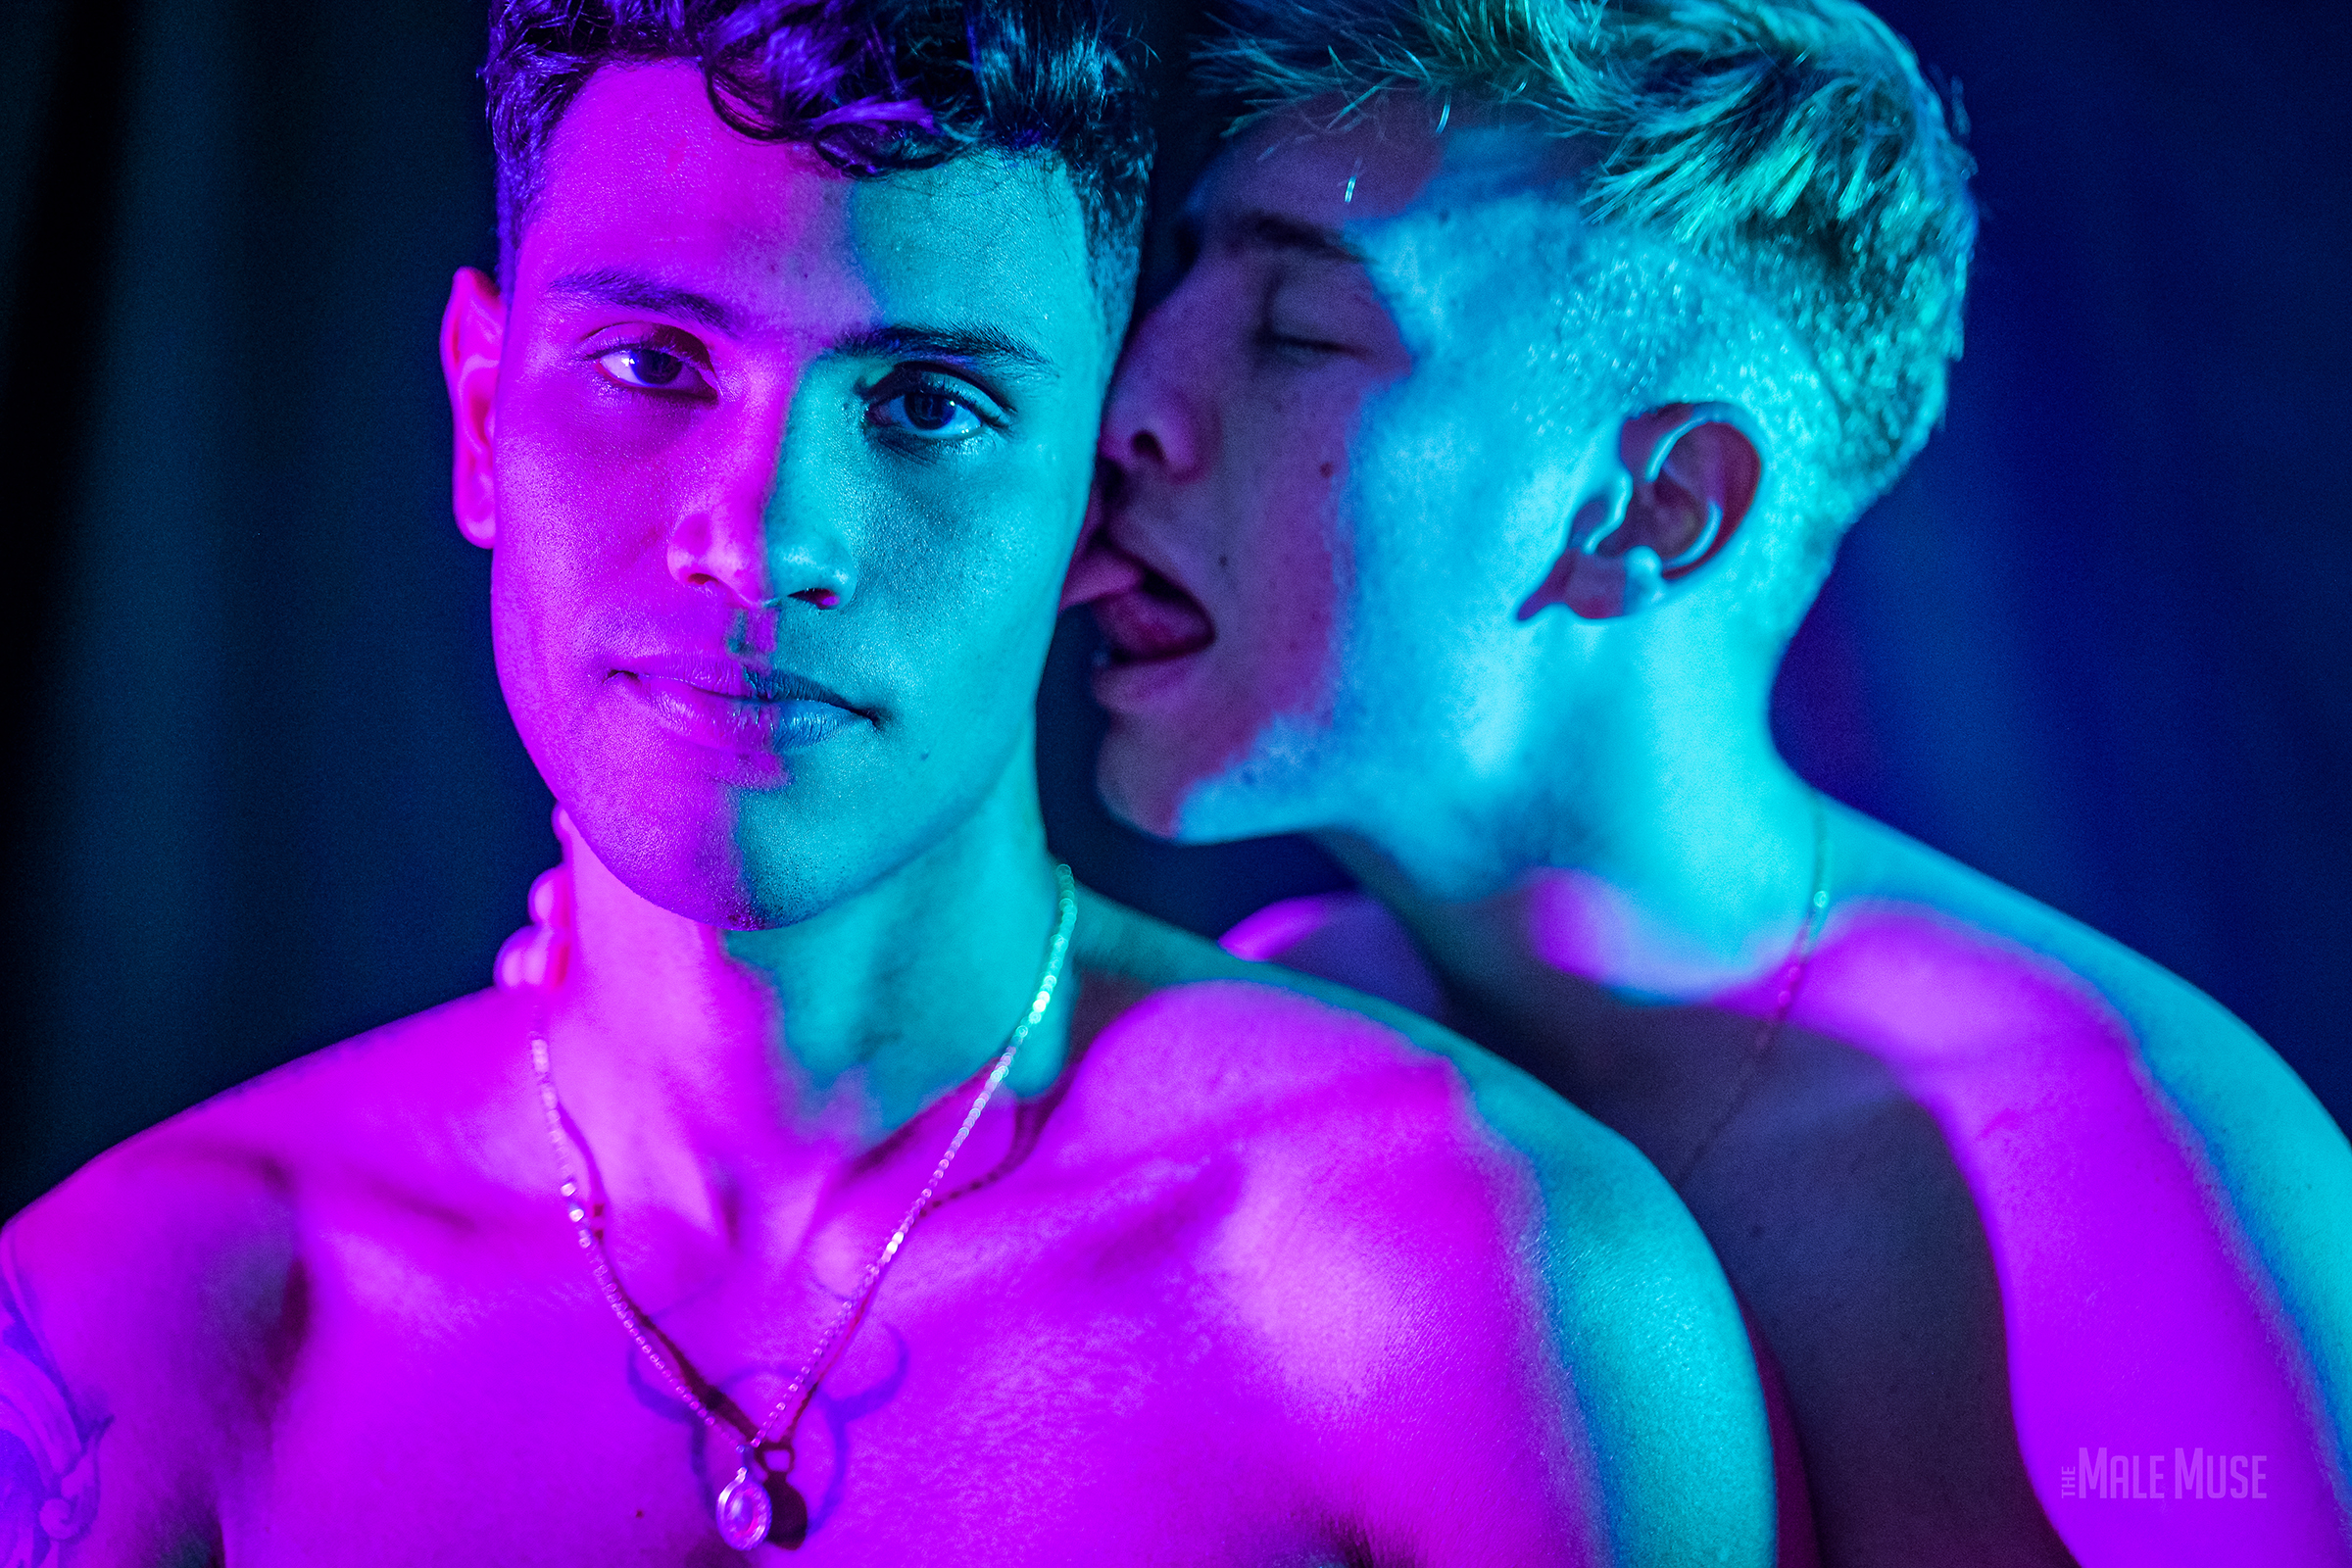 Cute Twinks Get Frisky in the Studio | Daily Dudes @ Dude Dump